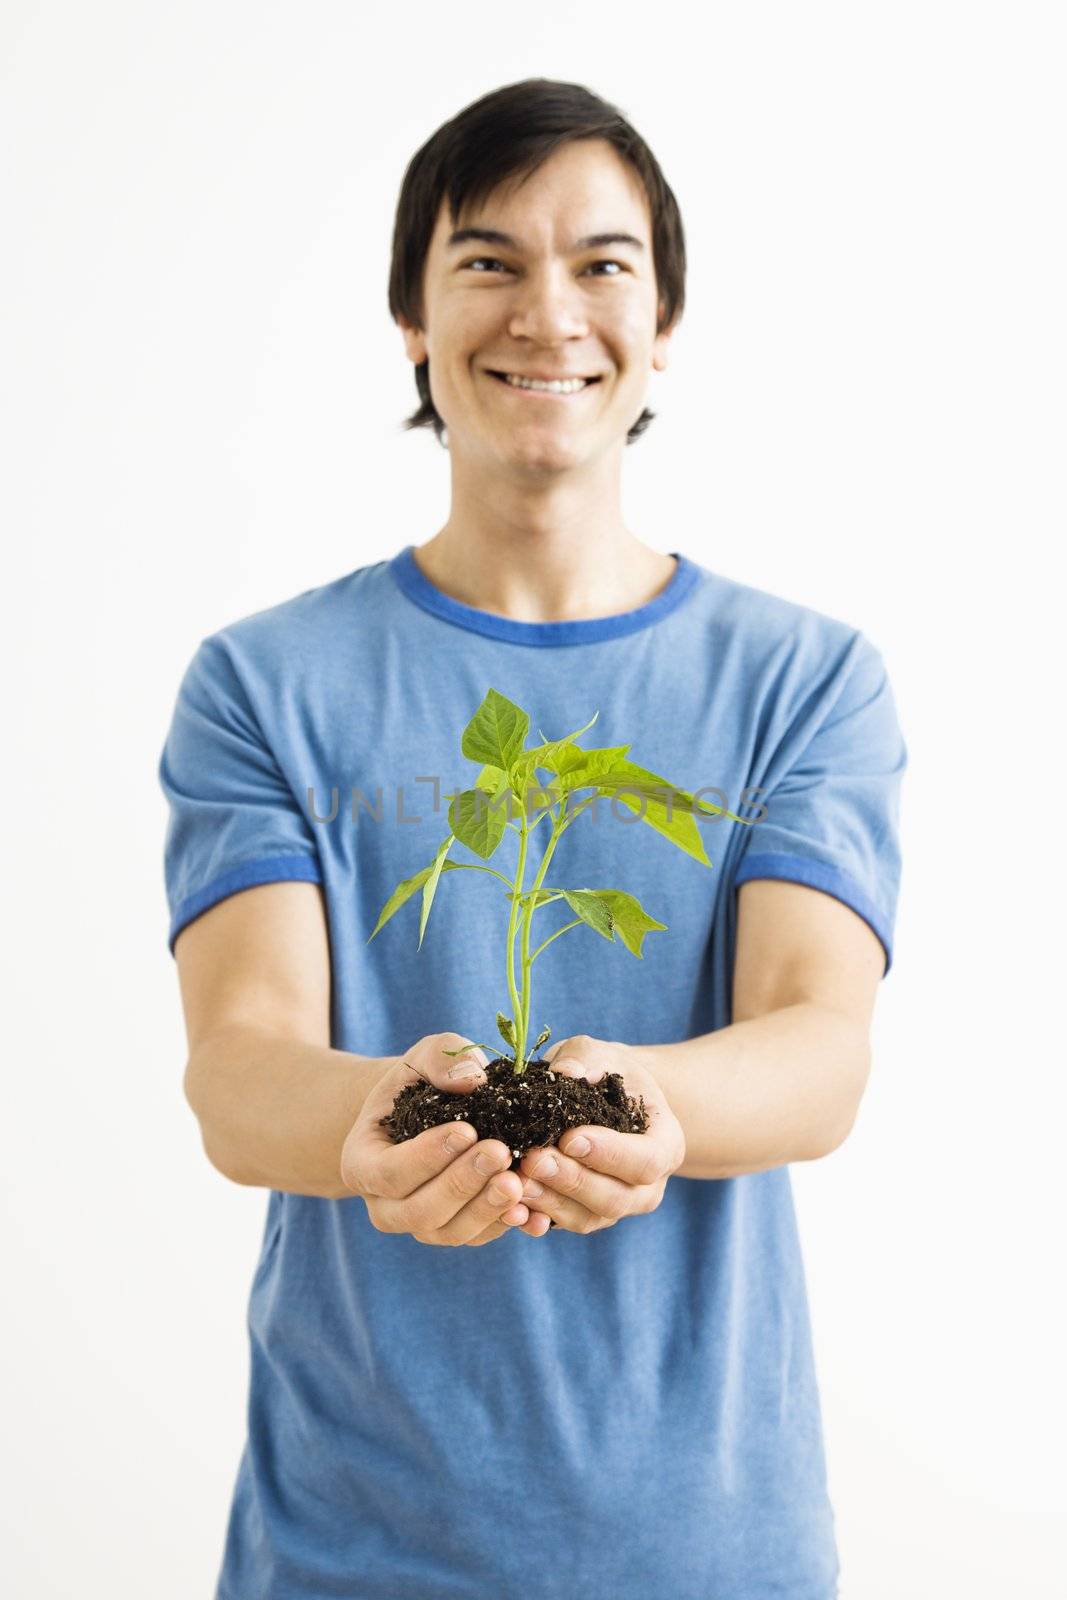 Asian man standing holding growing cayenne plant.